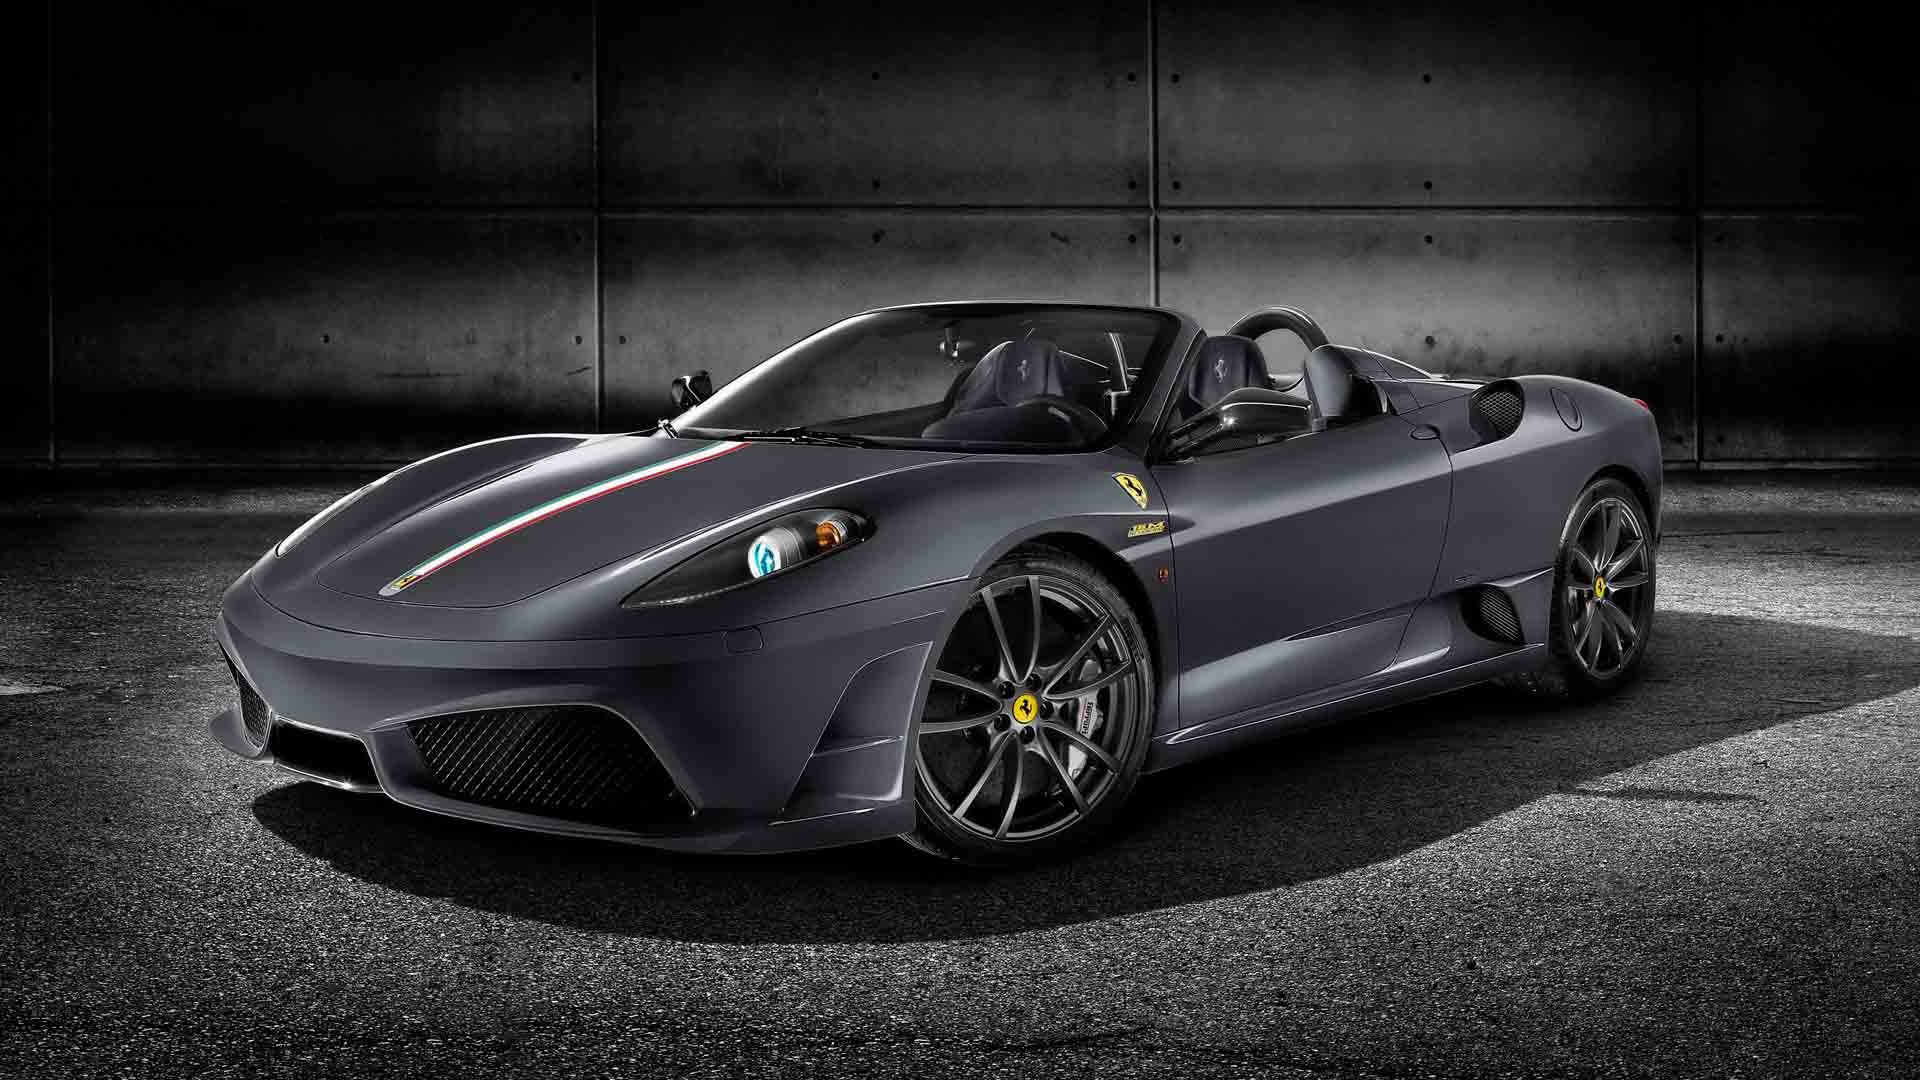 1920x1080 Best Collection Of Ferrari Exotic Car Wallpapers - SA Wallpapers